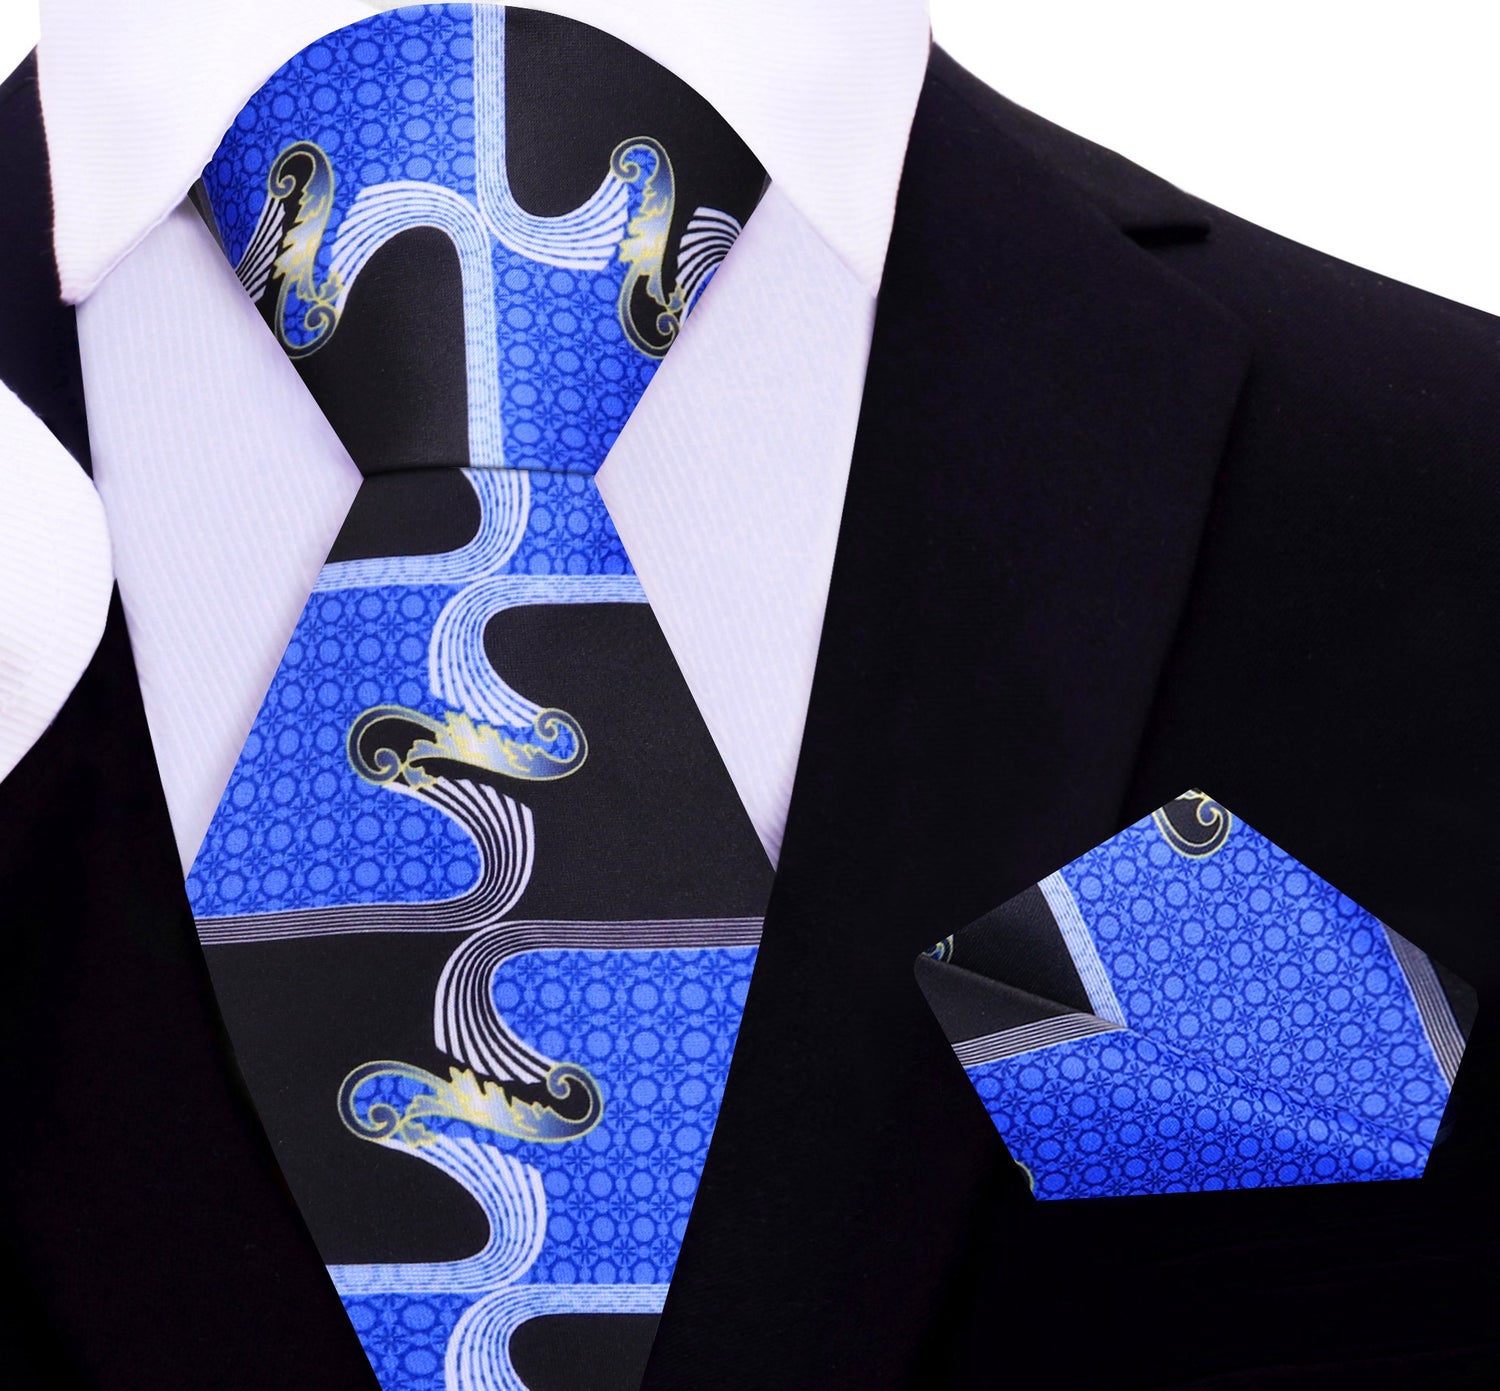 A Black, Blue, Yellow Gold Color Abstract Pattern Silk Tie, Pocket Square